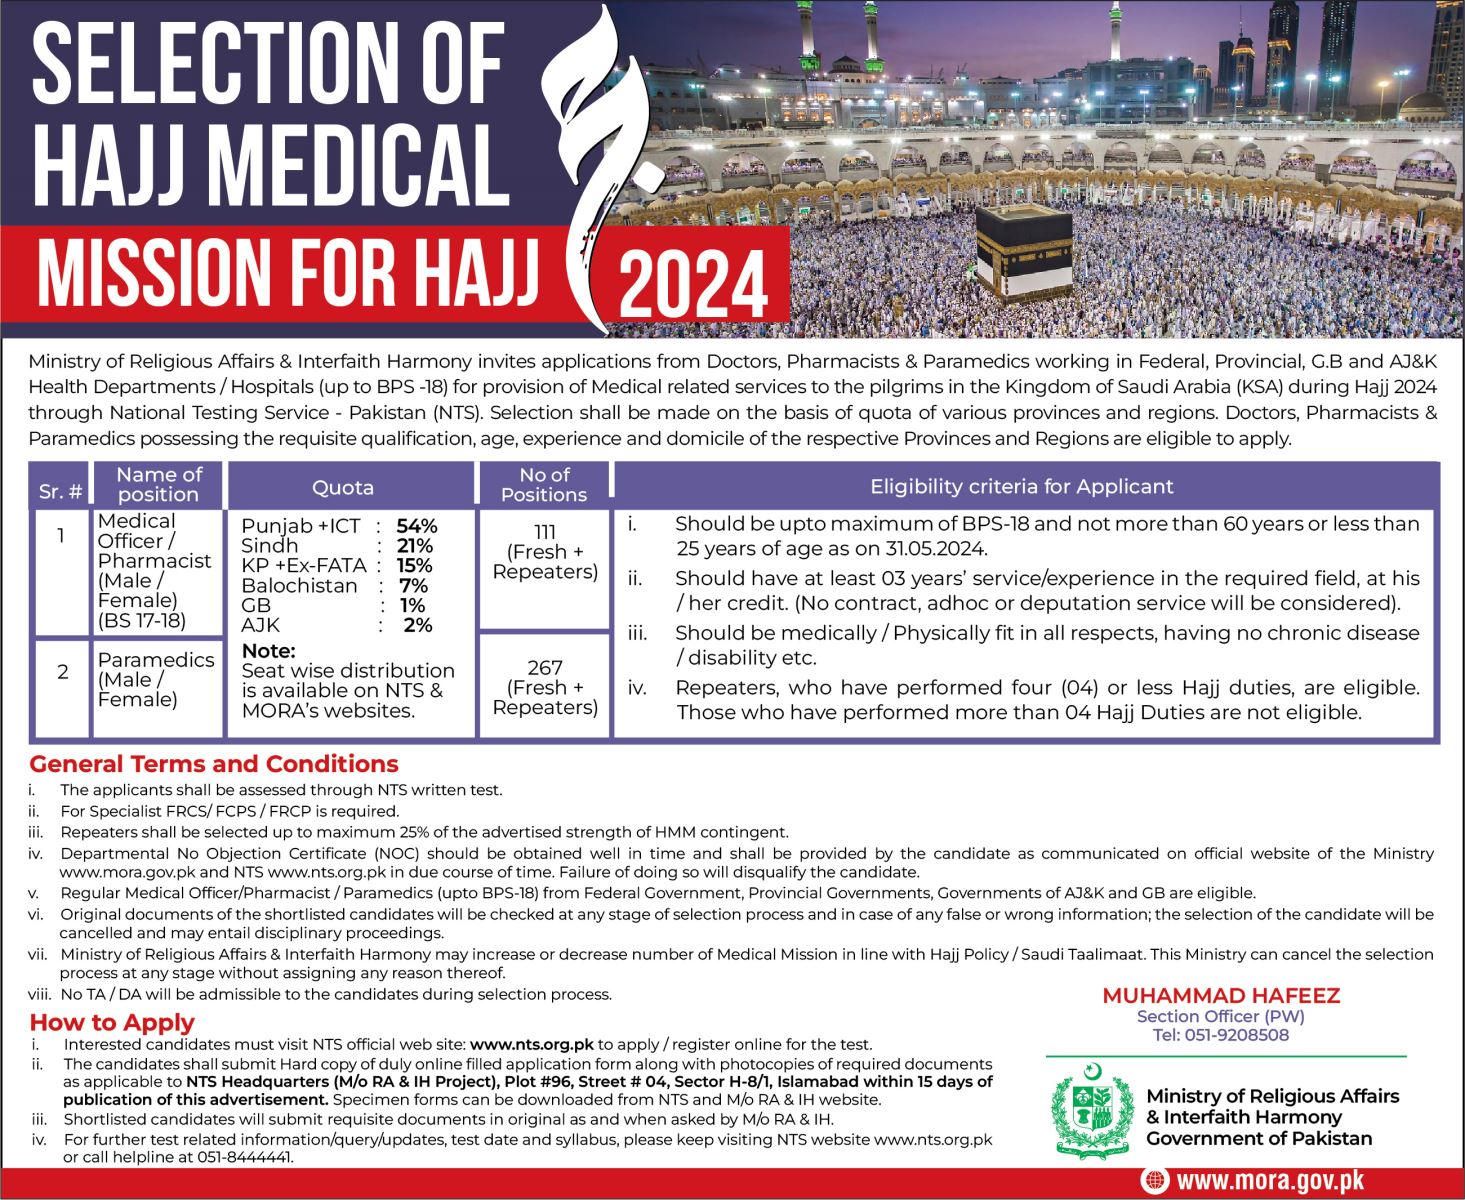 Hajj Medical Mission 2024 Application Form, Test date and syllabus AwamPK